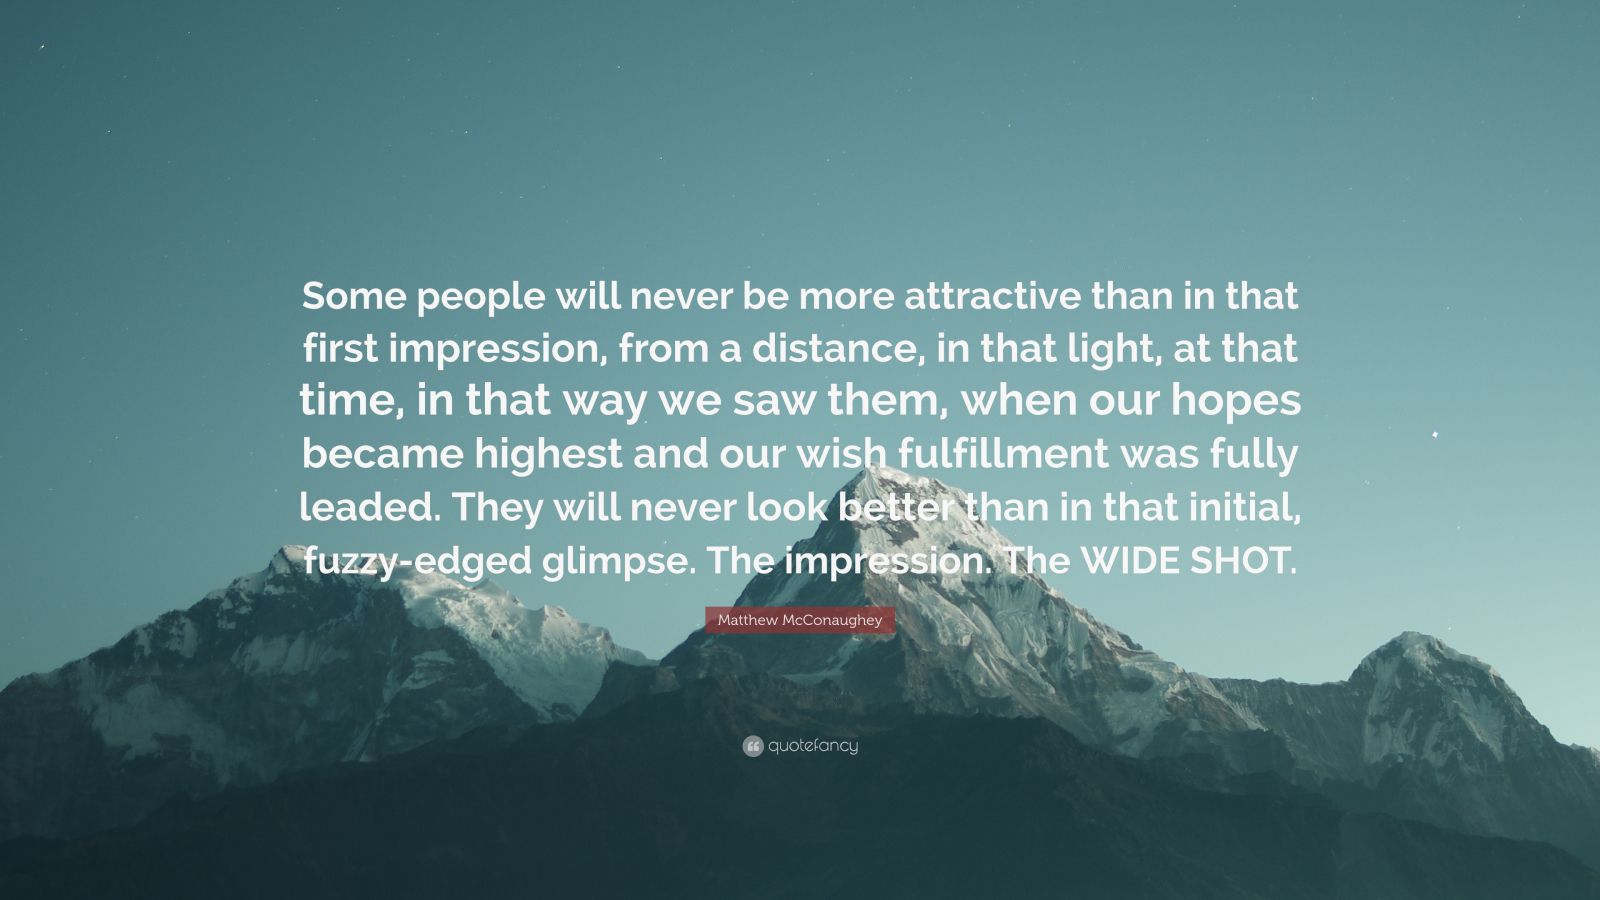 Matthew McConaughey Quote: “Some people will never be more attractive ...